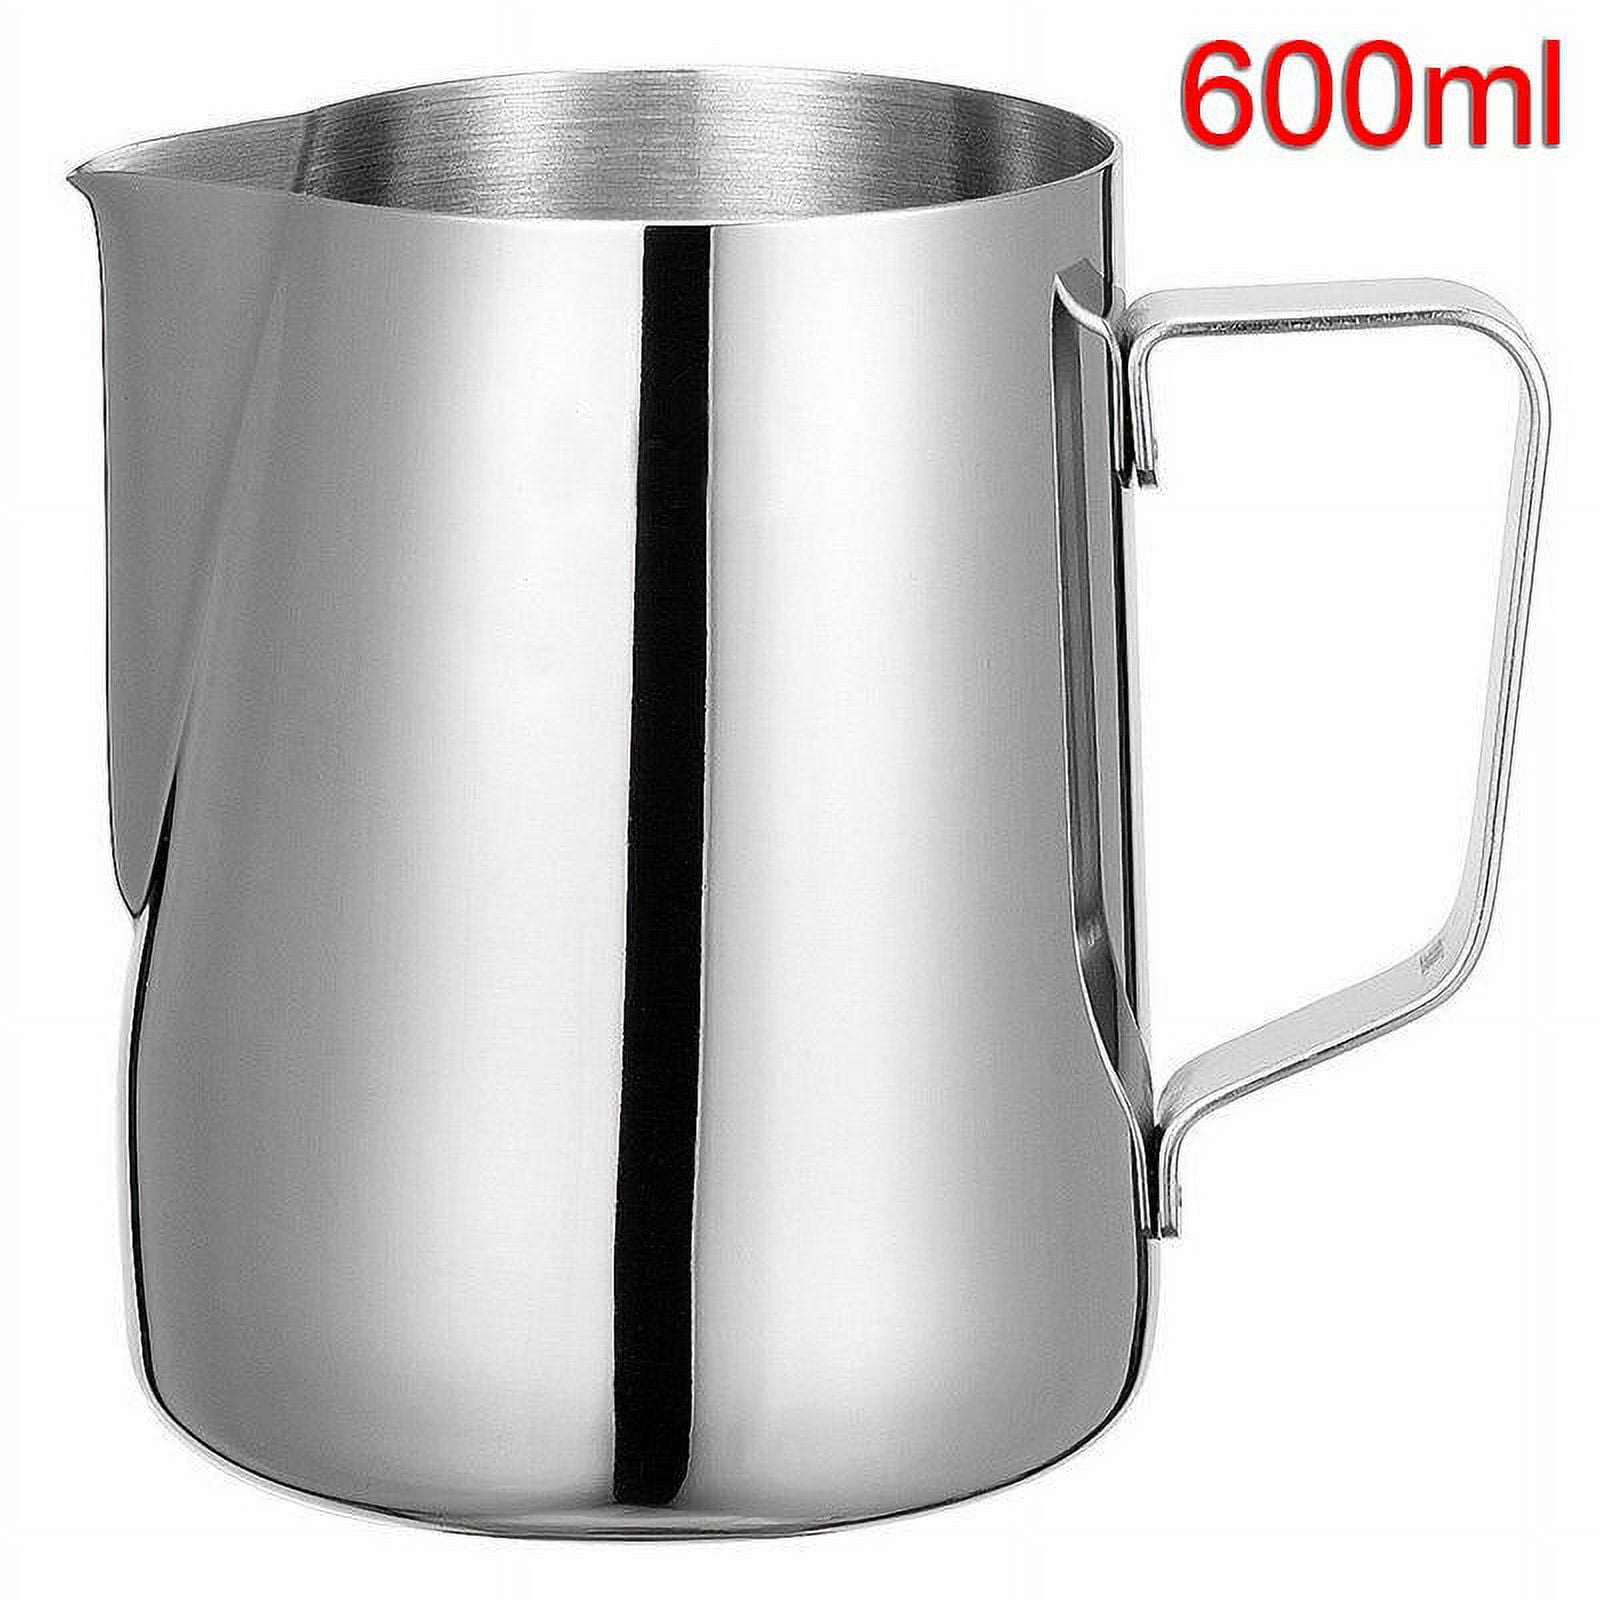 1pc Stainless Steel Milk Frothing Pitcher Espresso Steaming Coffee